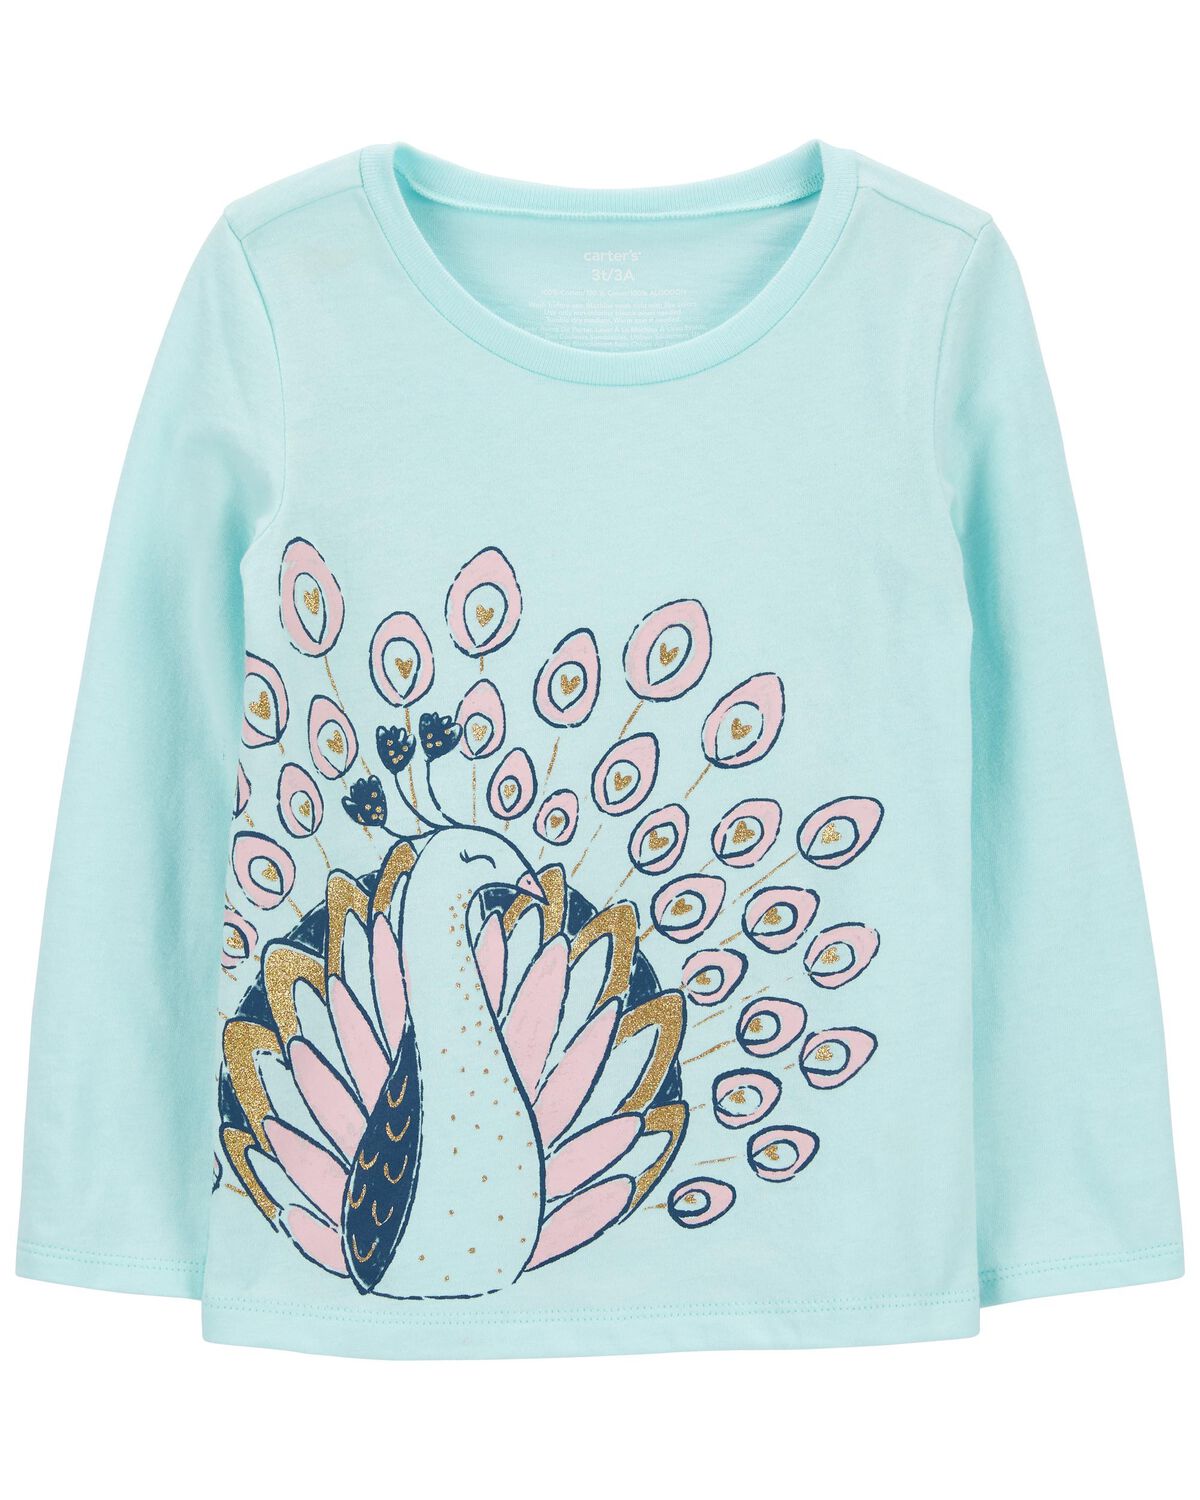 Toddler Peacock Graphic Tee